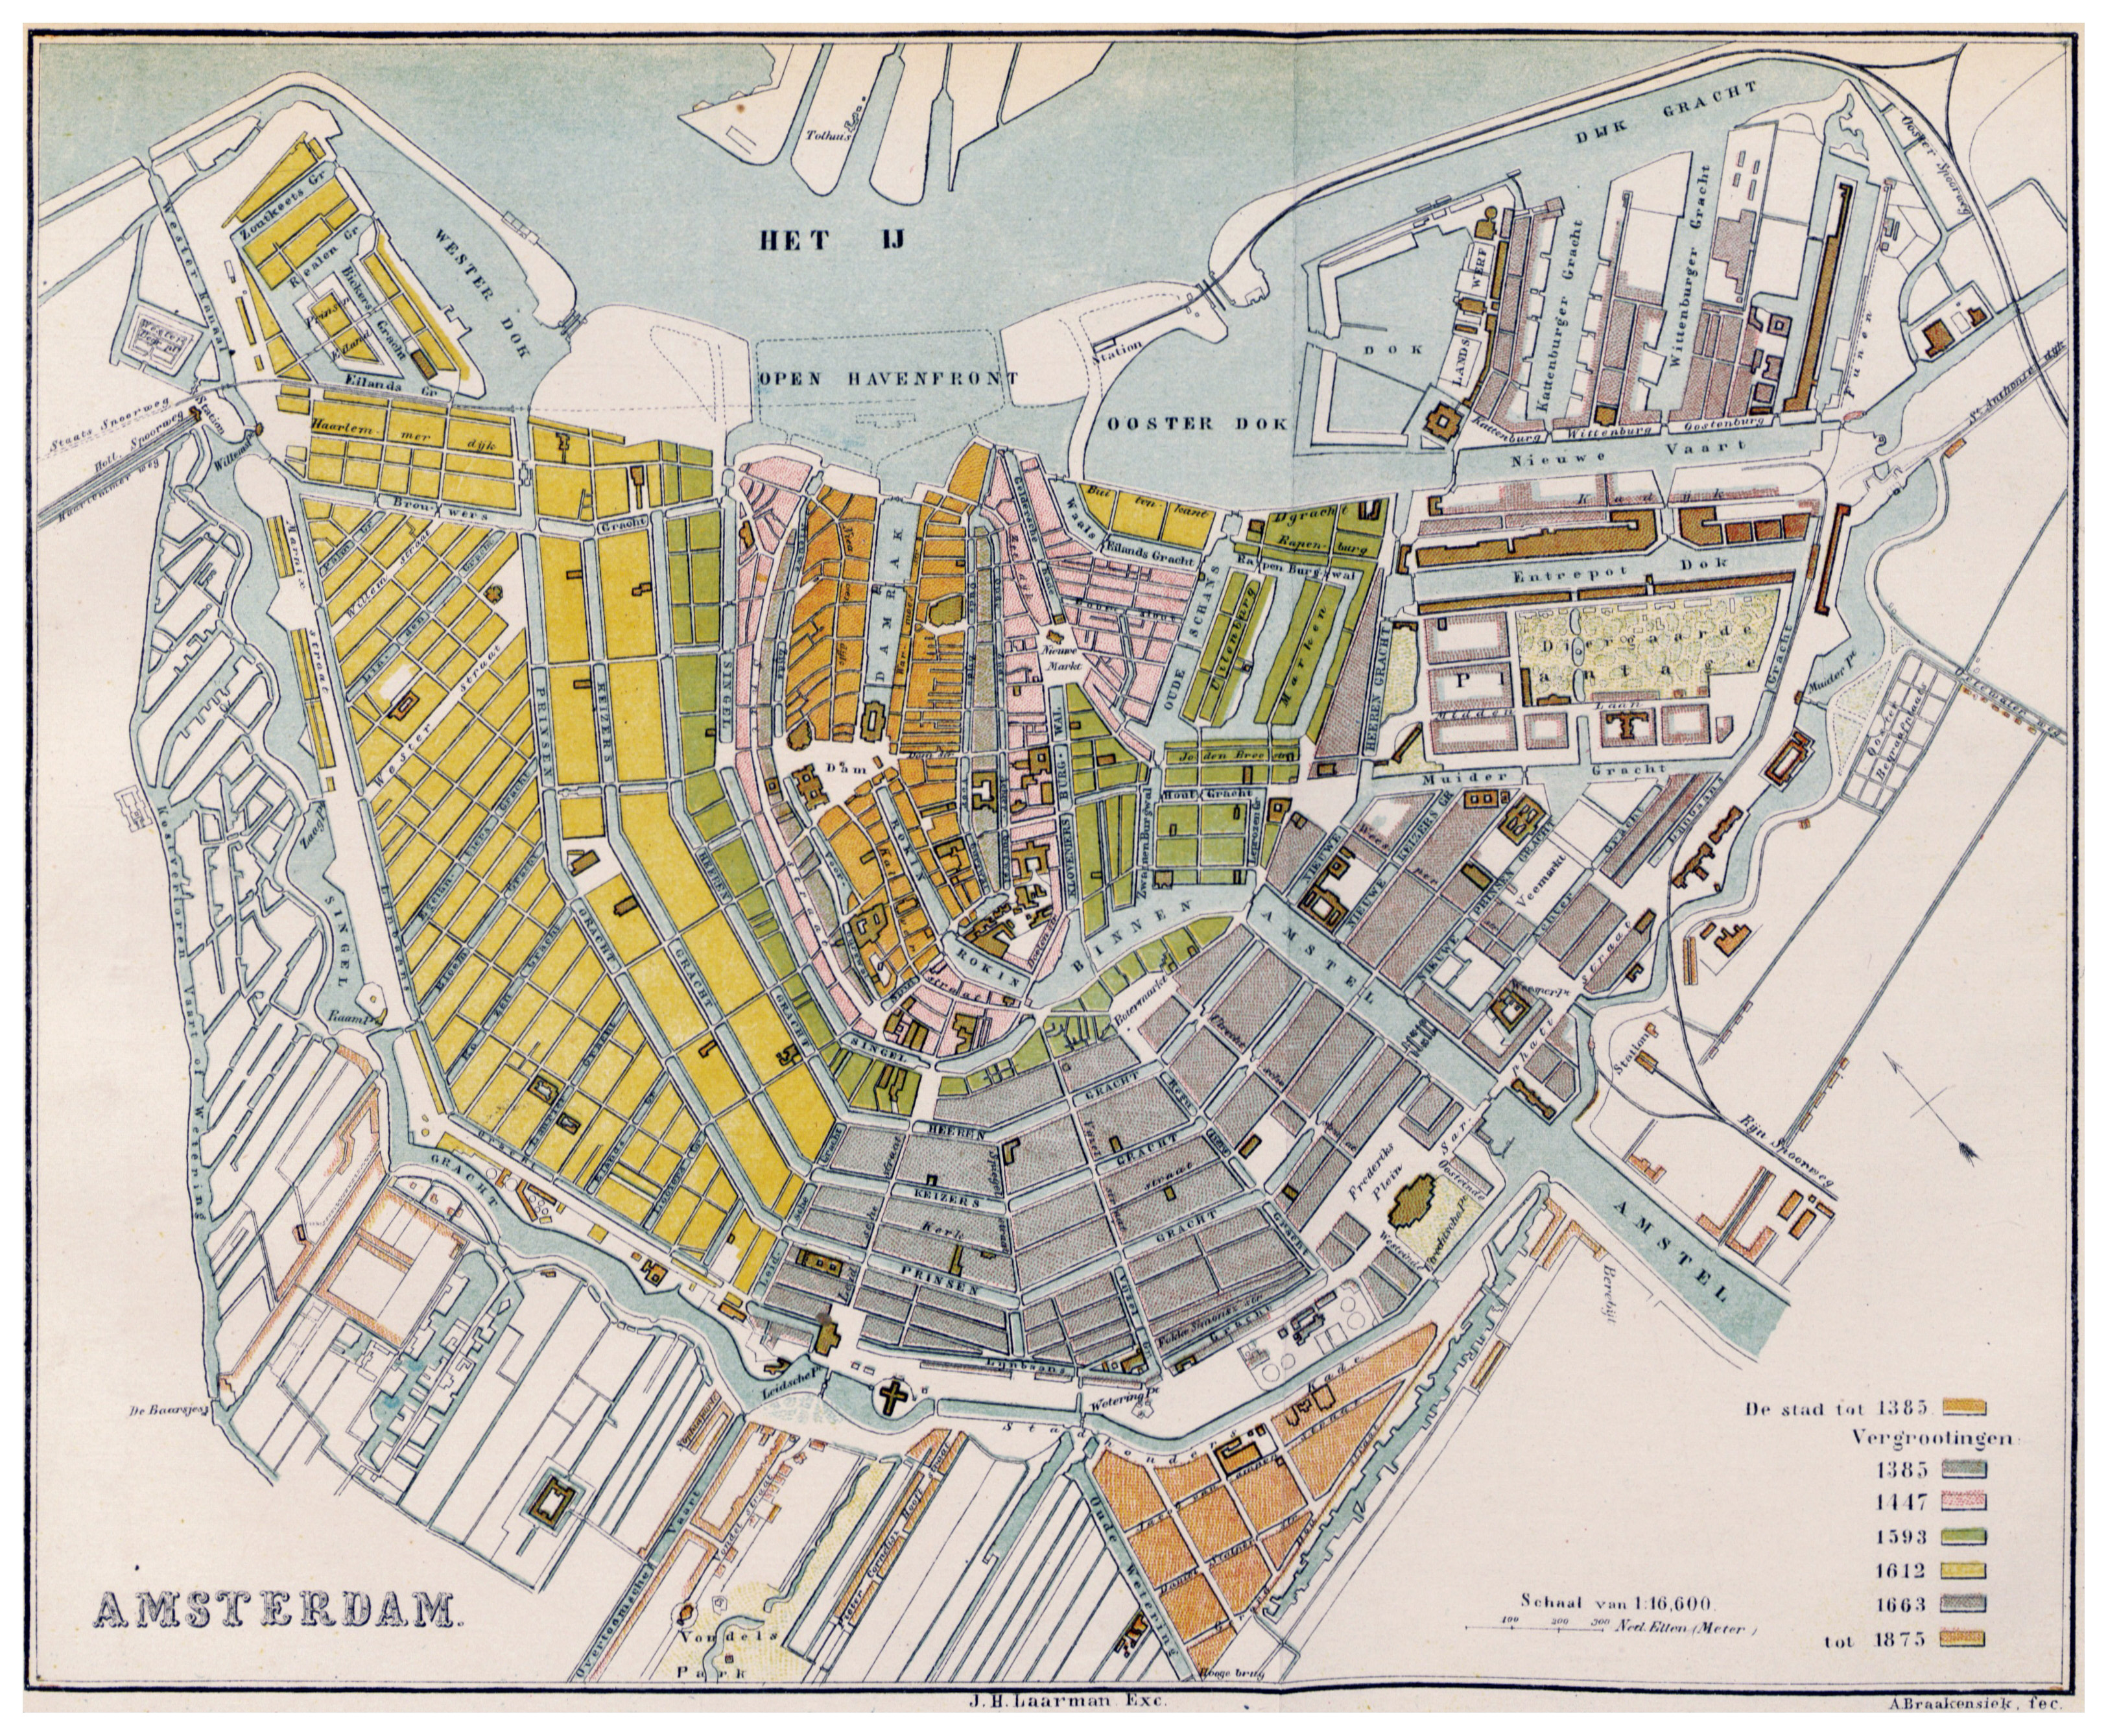 large-detailed-old-map-of-amsterdam-city-(1385-1875).jpg